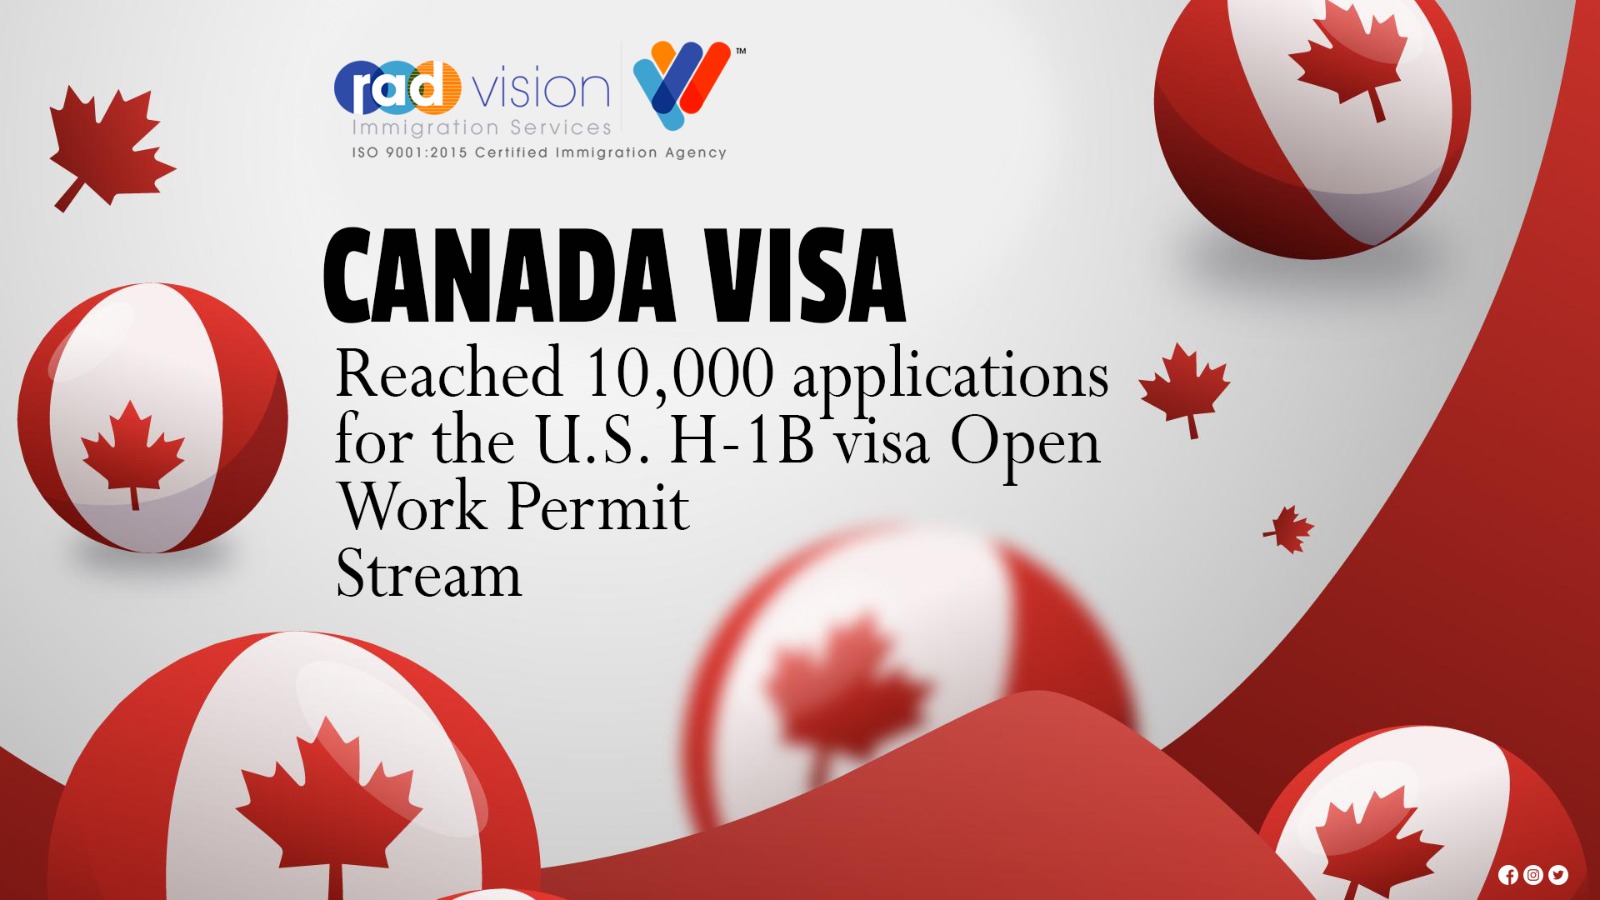 Canada Visa Reached 10,000 Applications For The U.S. H-1B Visa Open Work Permit Stream